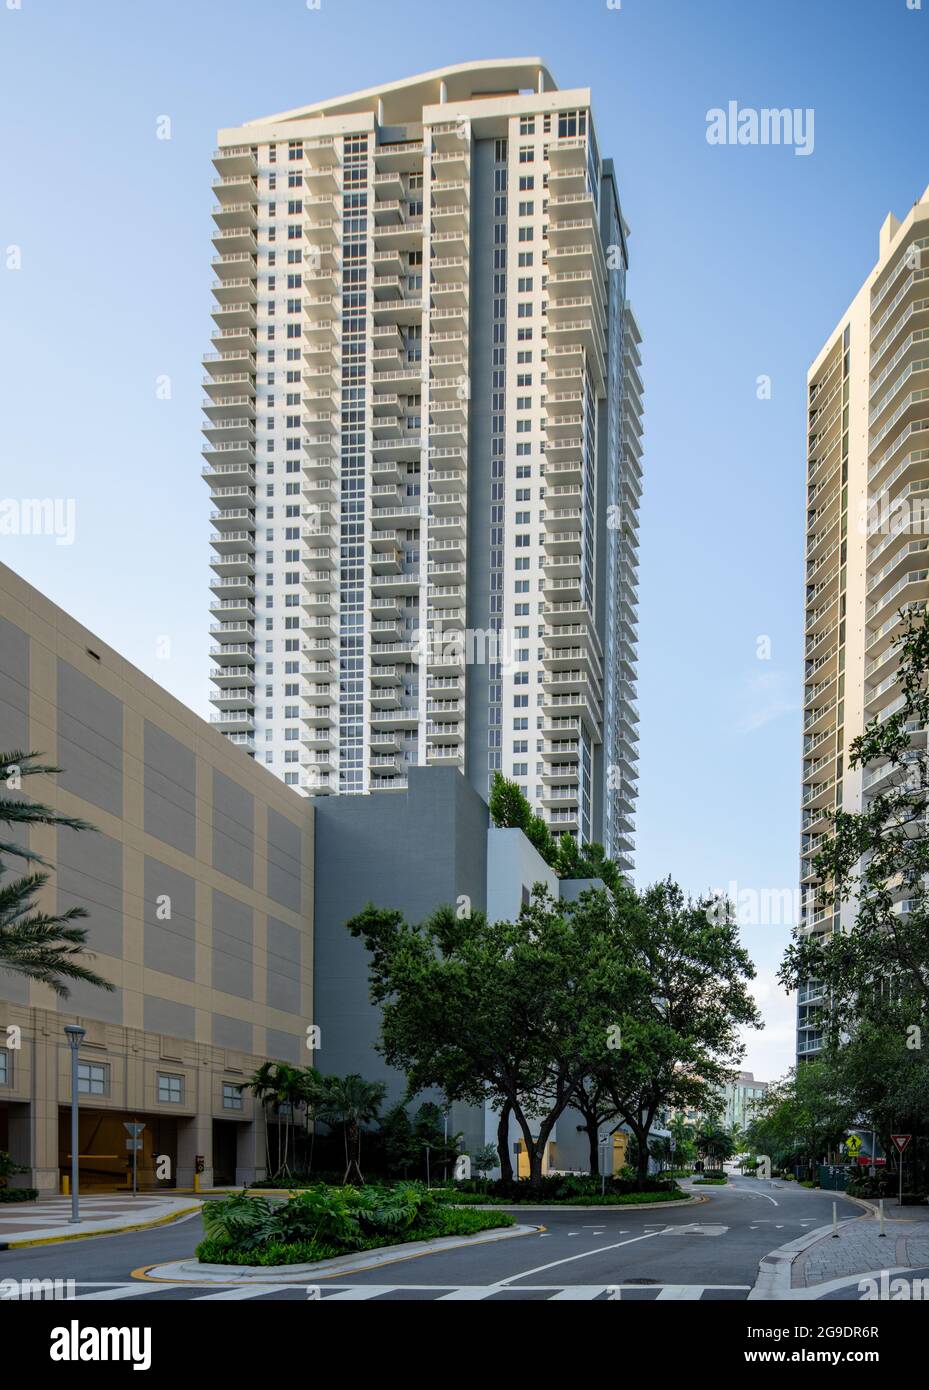 Fort Lauderdale, FL, USA - July 23, 2021: Alluvion Fort Lauderdale luxury  residential rental apartments Stock Photo - Alamy